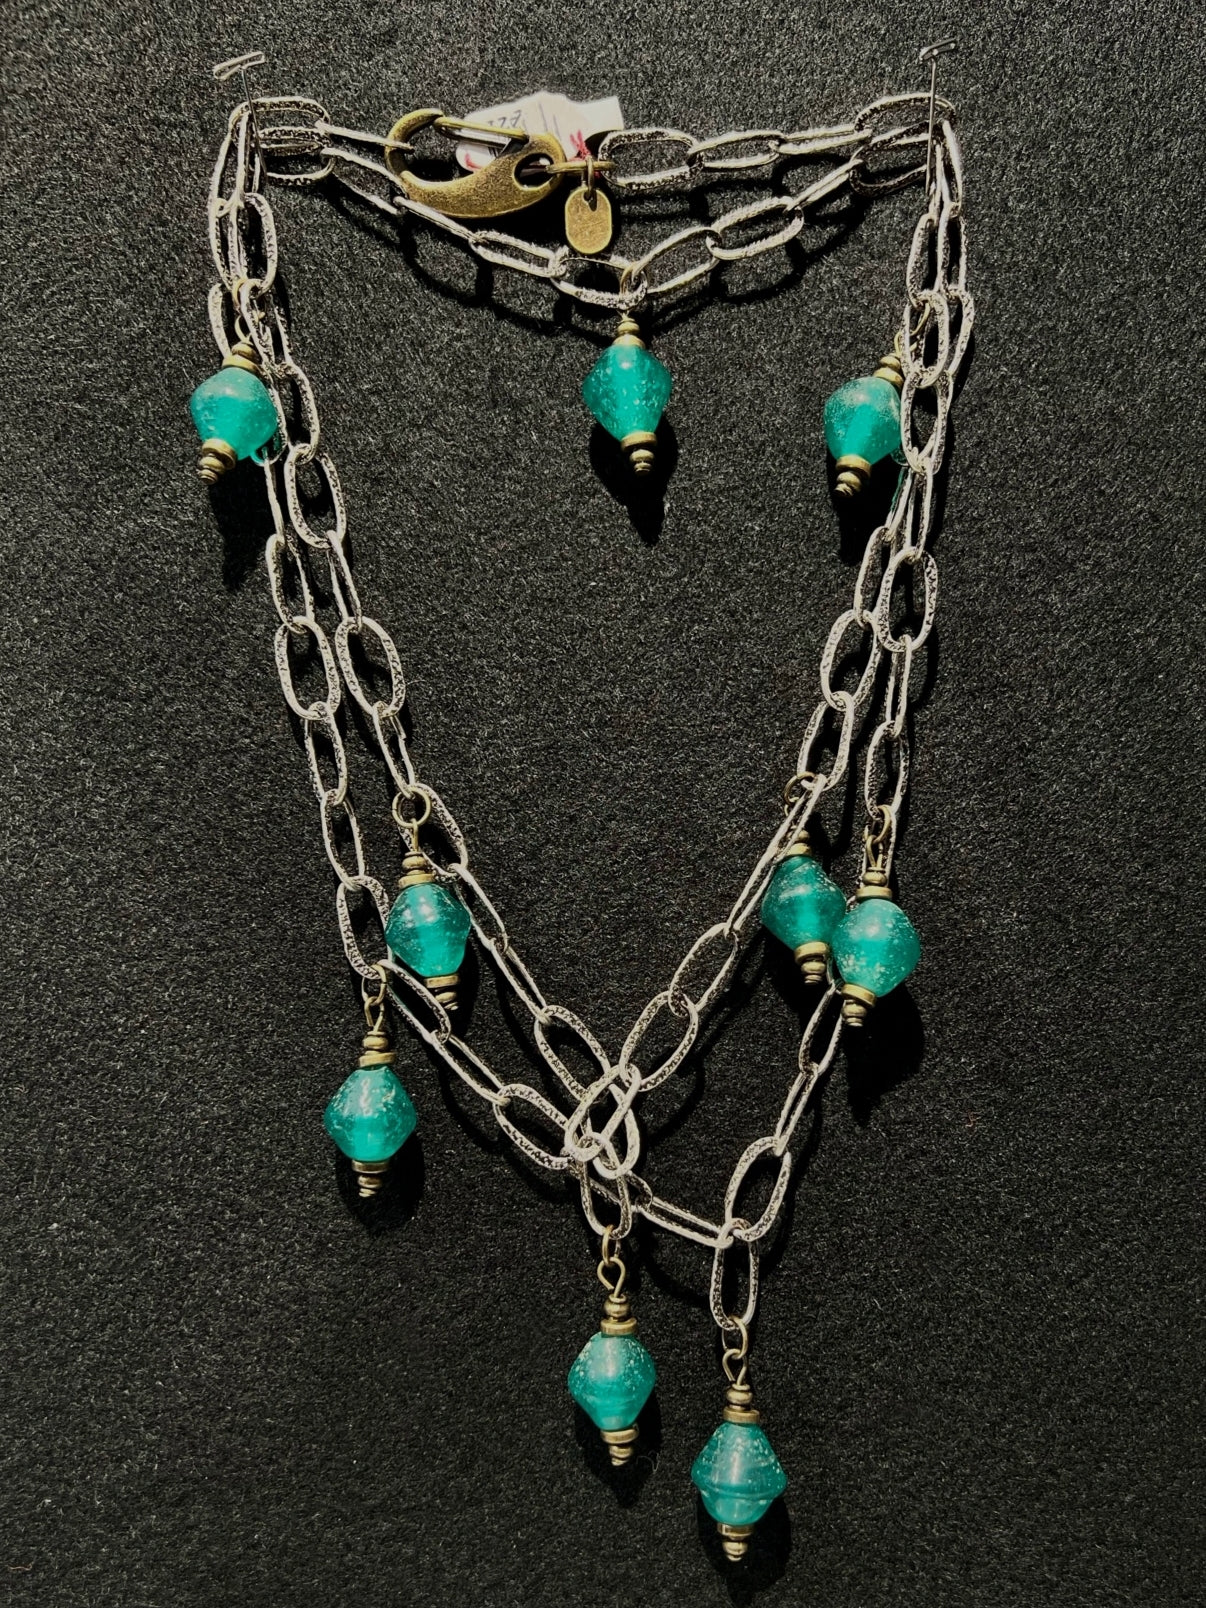 Indonesian Glass Beads Necklace